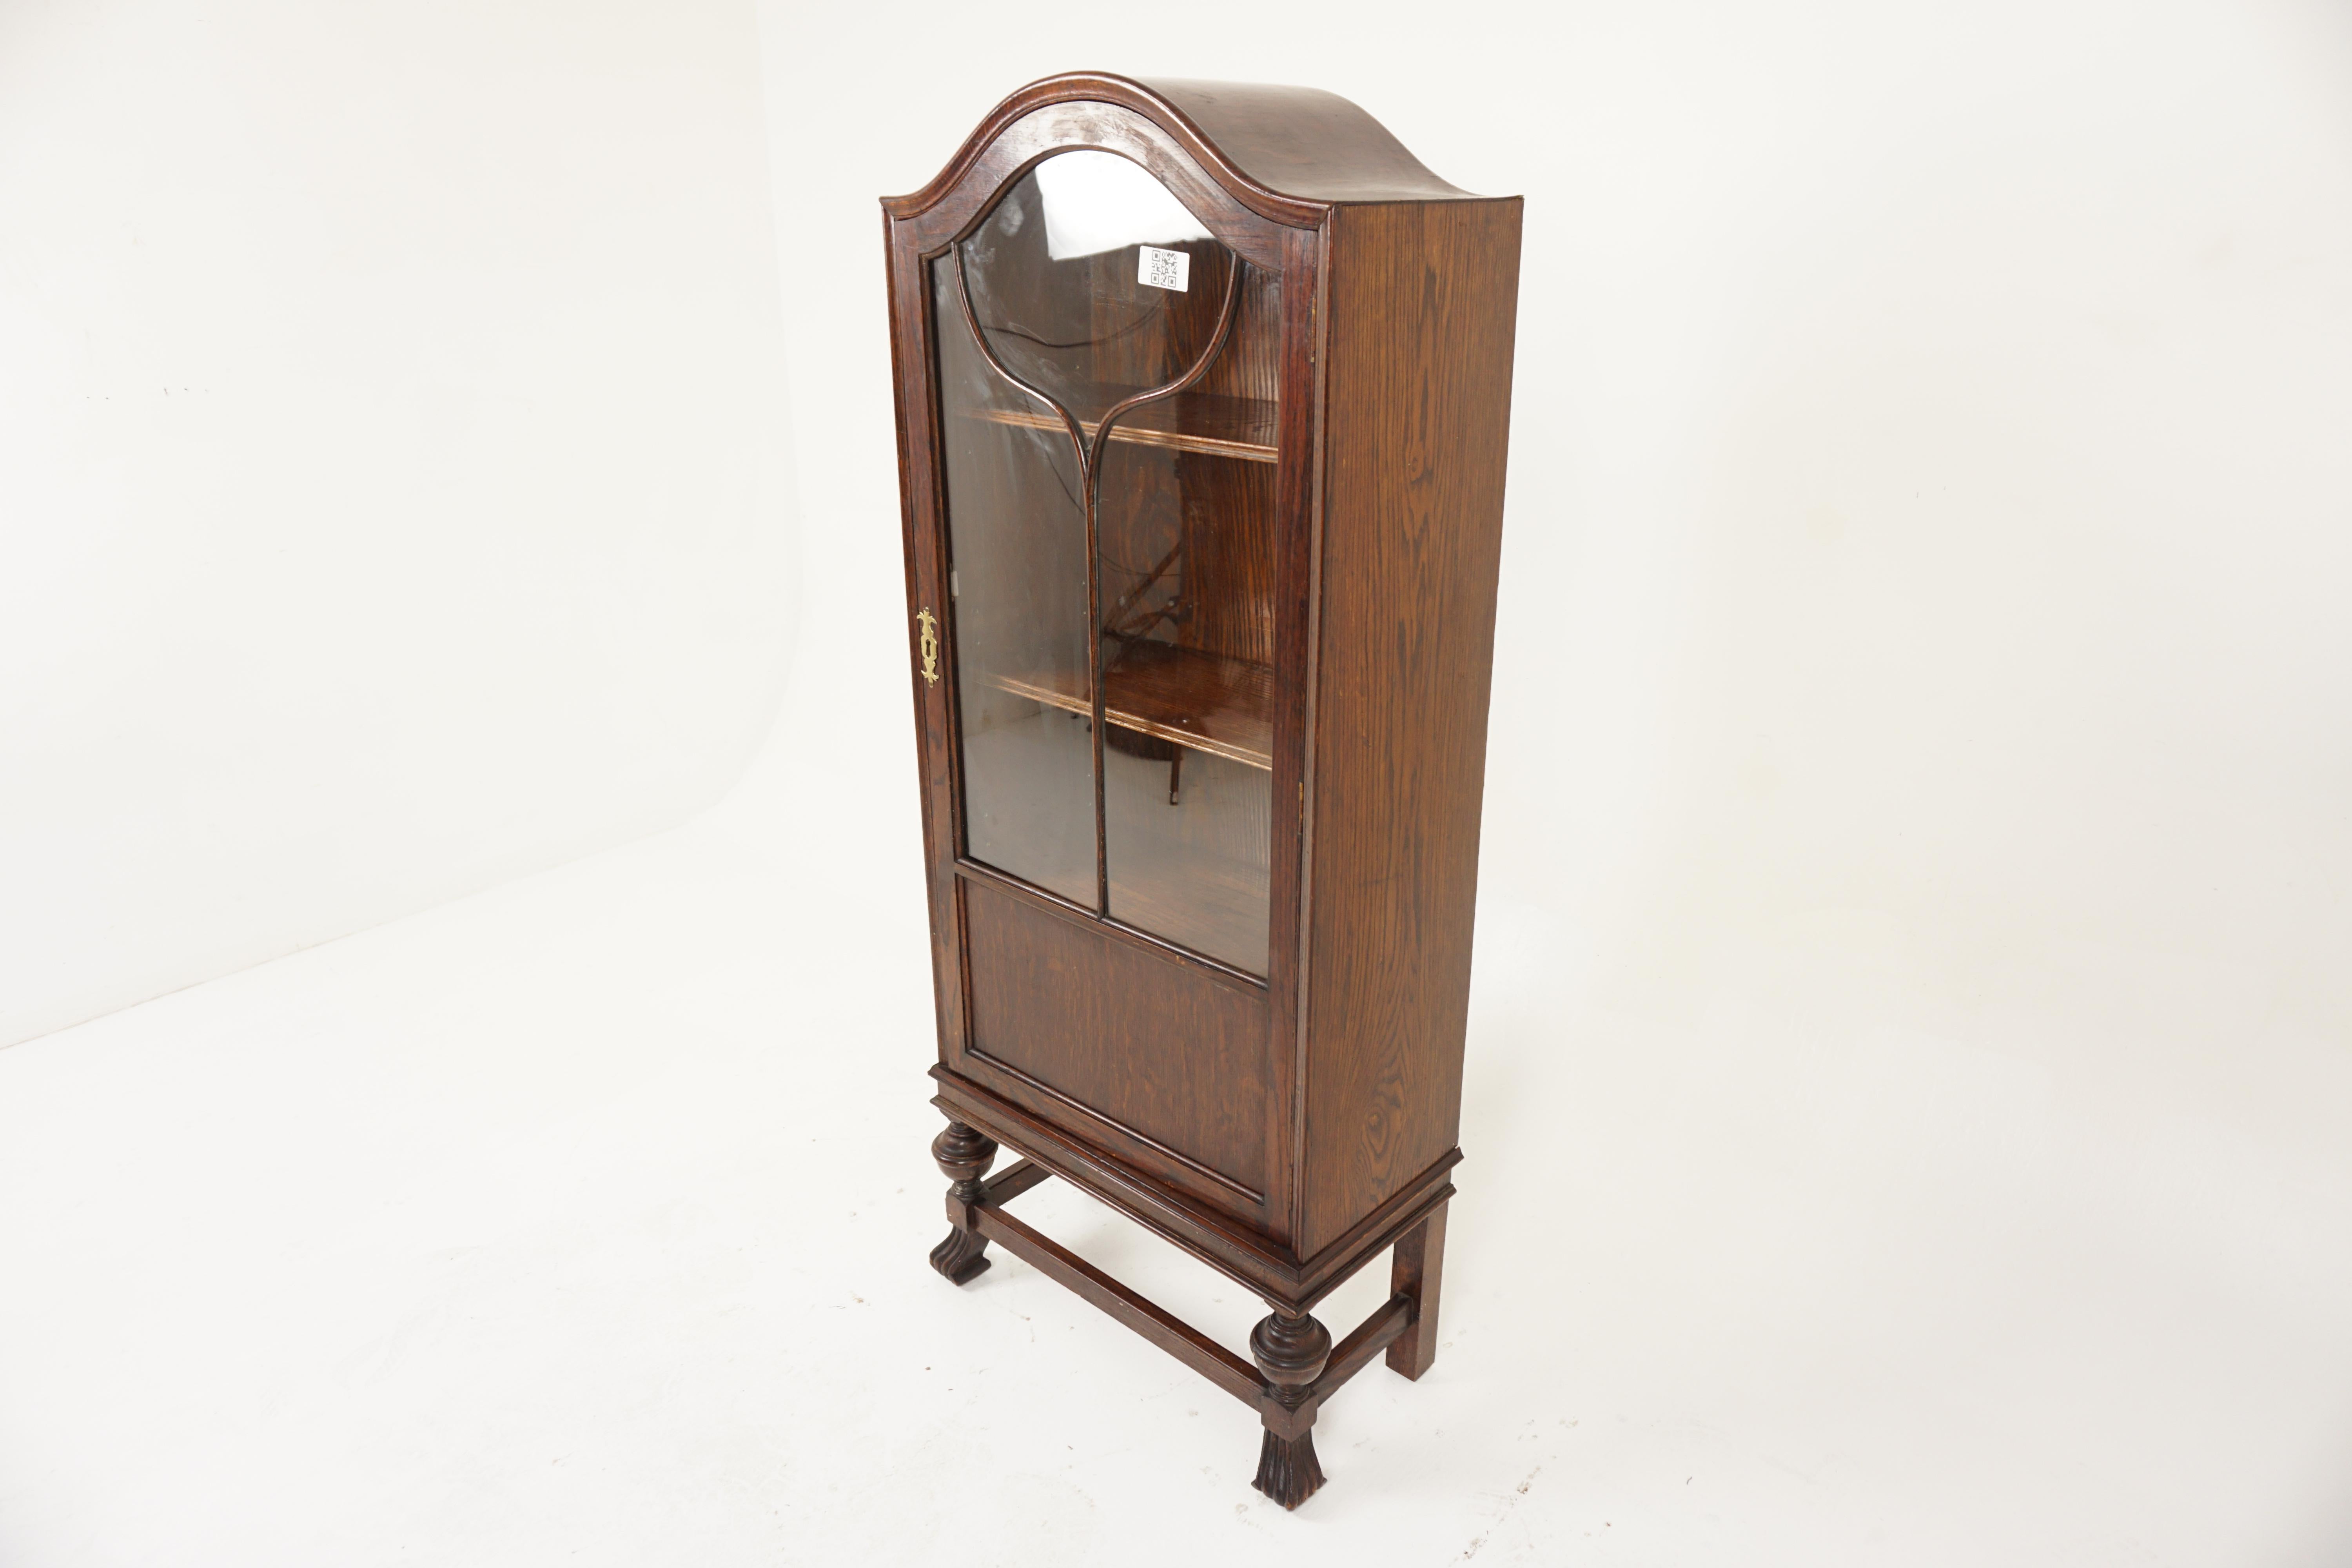 Antique Oak Bow Top Art Deco Bookcase, Display Cabinet, Scotland 1920, H987

Solid Oak
Original finish
With dome shaped top
Single original glass door with moulding in the front
Opens to reveal three adjustable shelves
Brass escutcheon but is